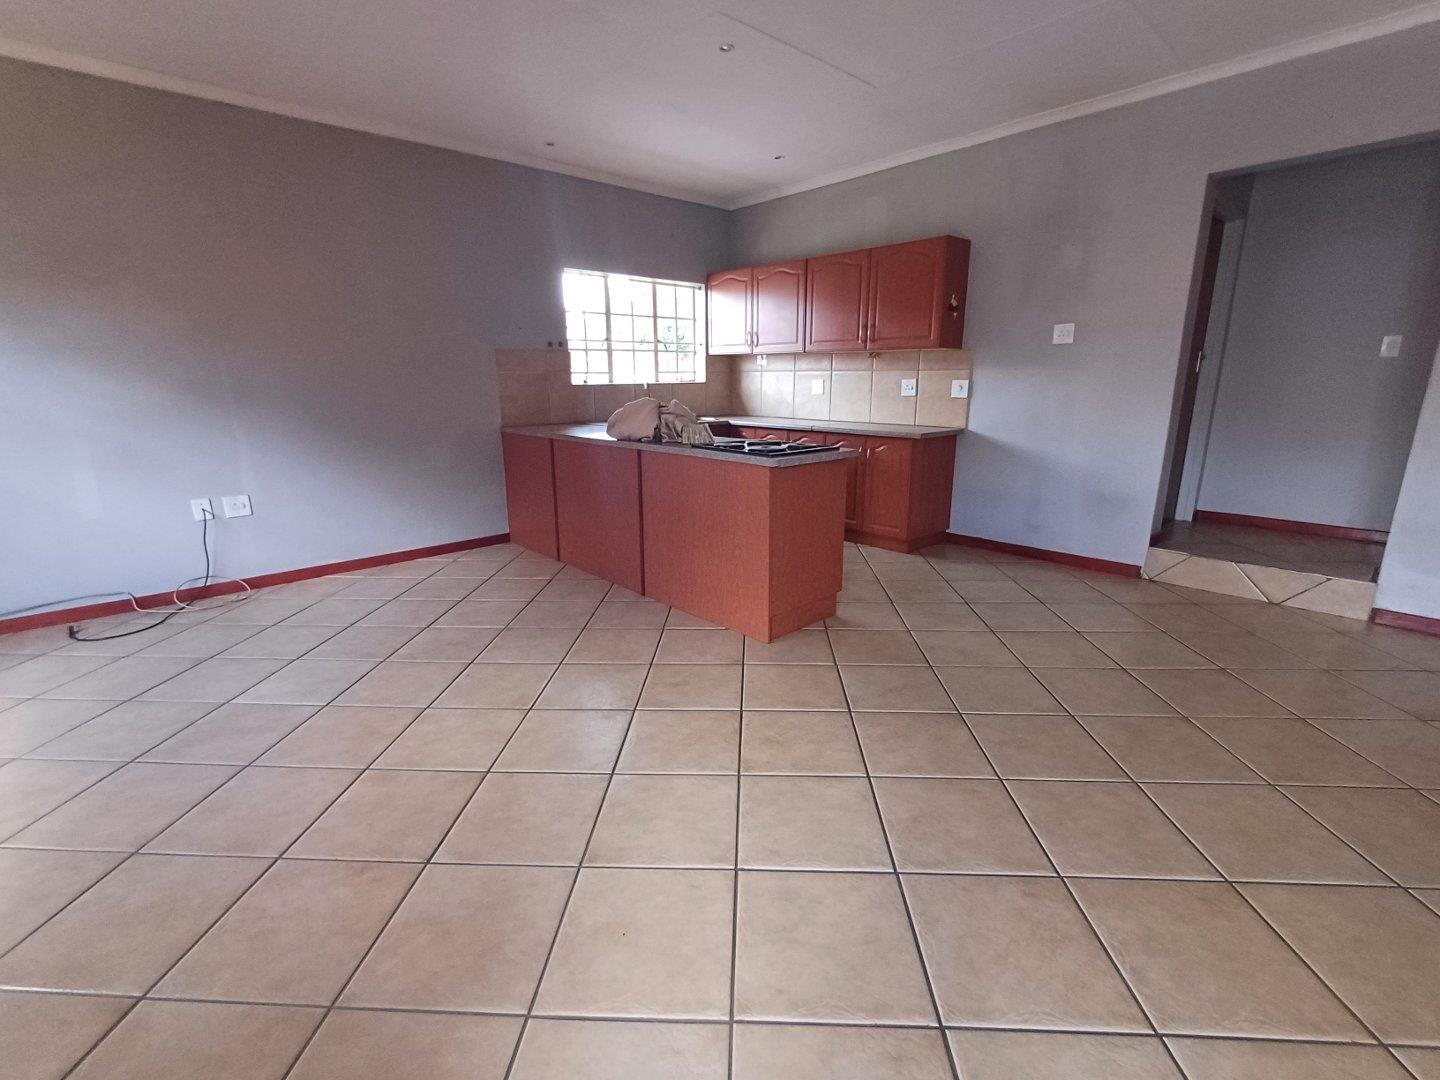 2 Bedroom Townhouse to rent in Ermelo